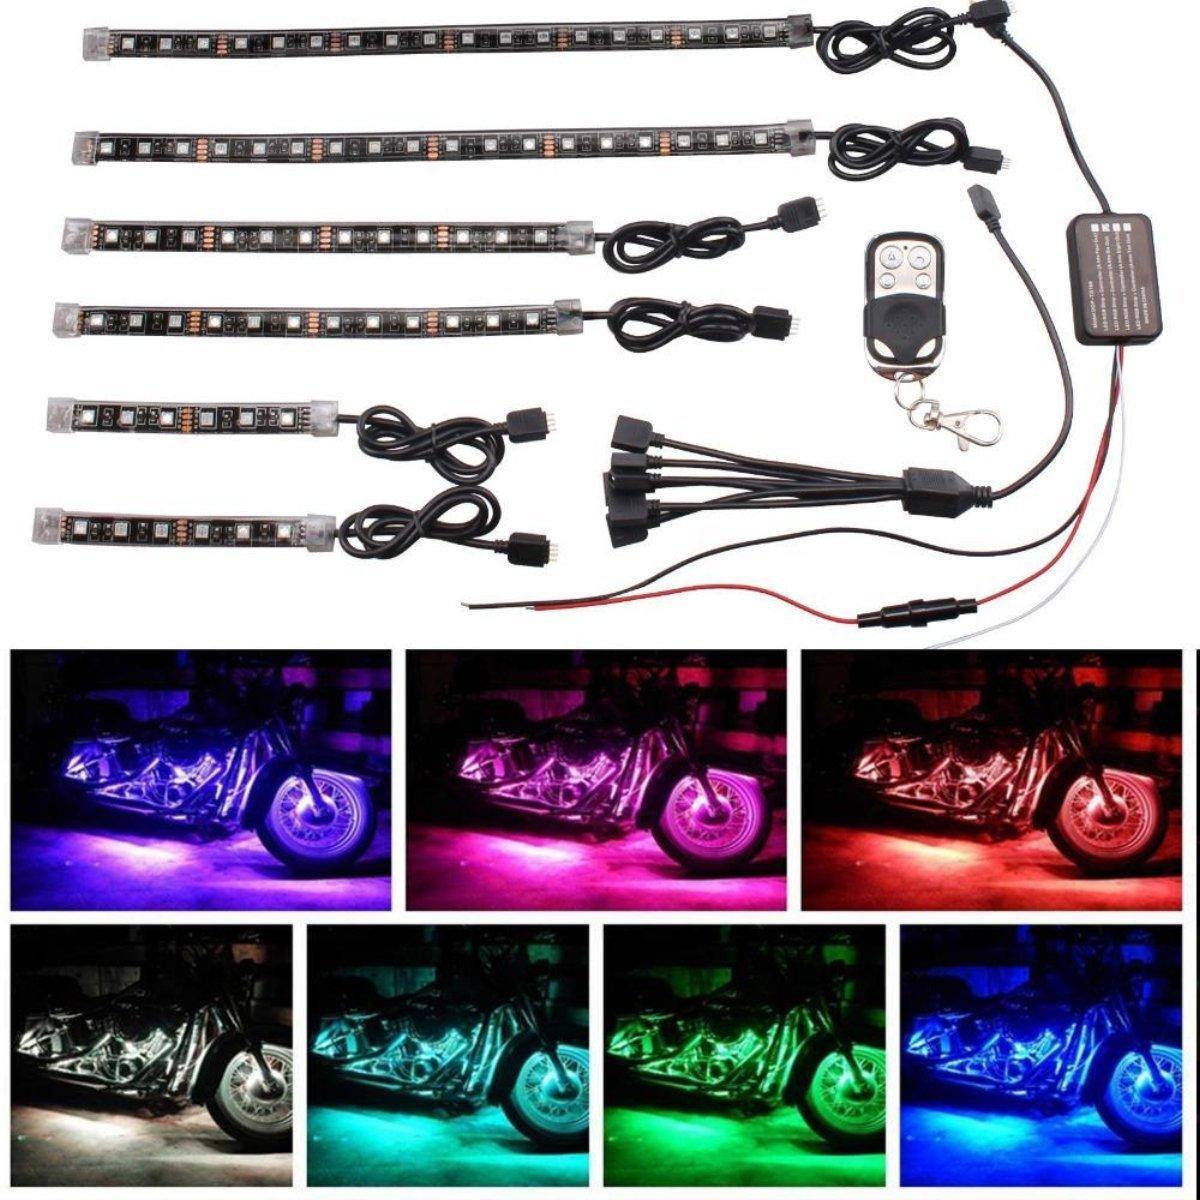 Motorcycle 6x LED Lights Ultra Flexible Strips, Rgb, Waterproof, w/ Remote Controller - American Legend Rider